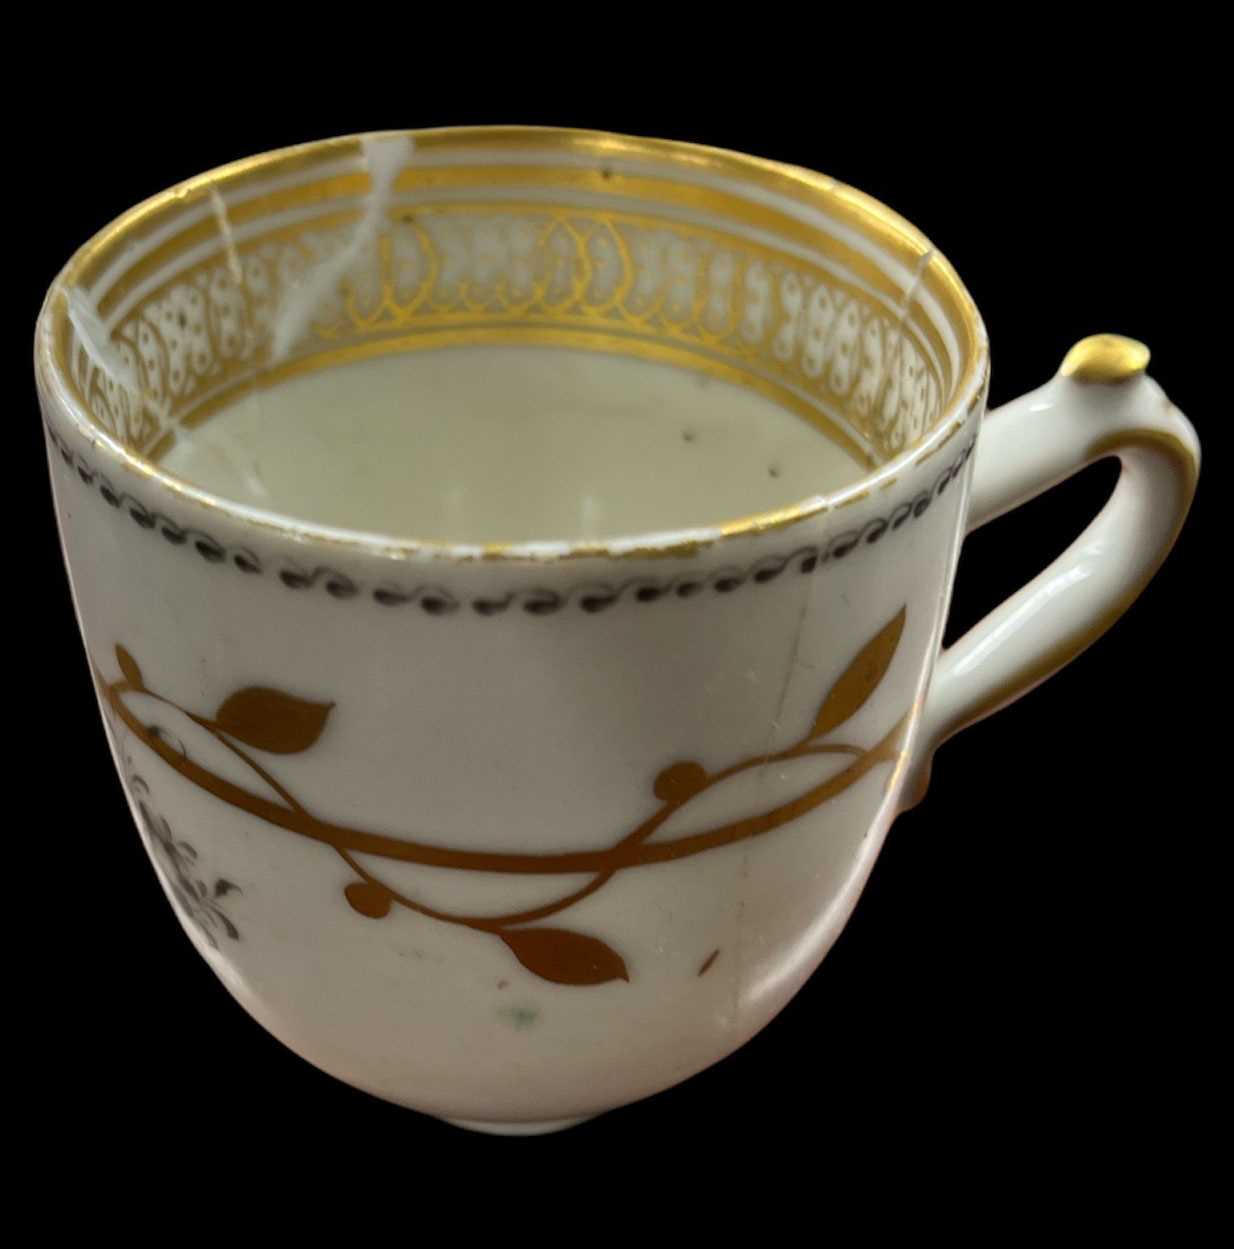 An 18th century Chinese coffee cup with gold floral decoration